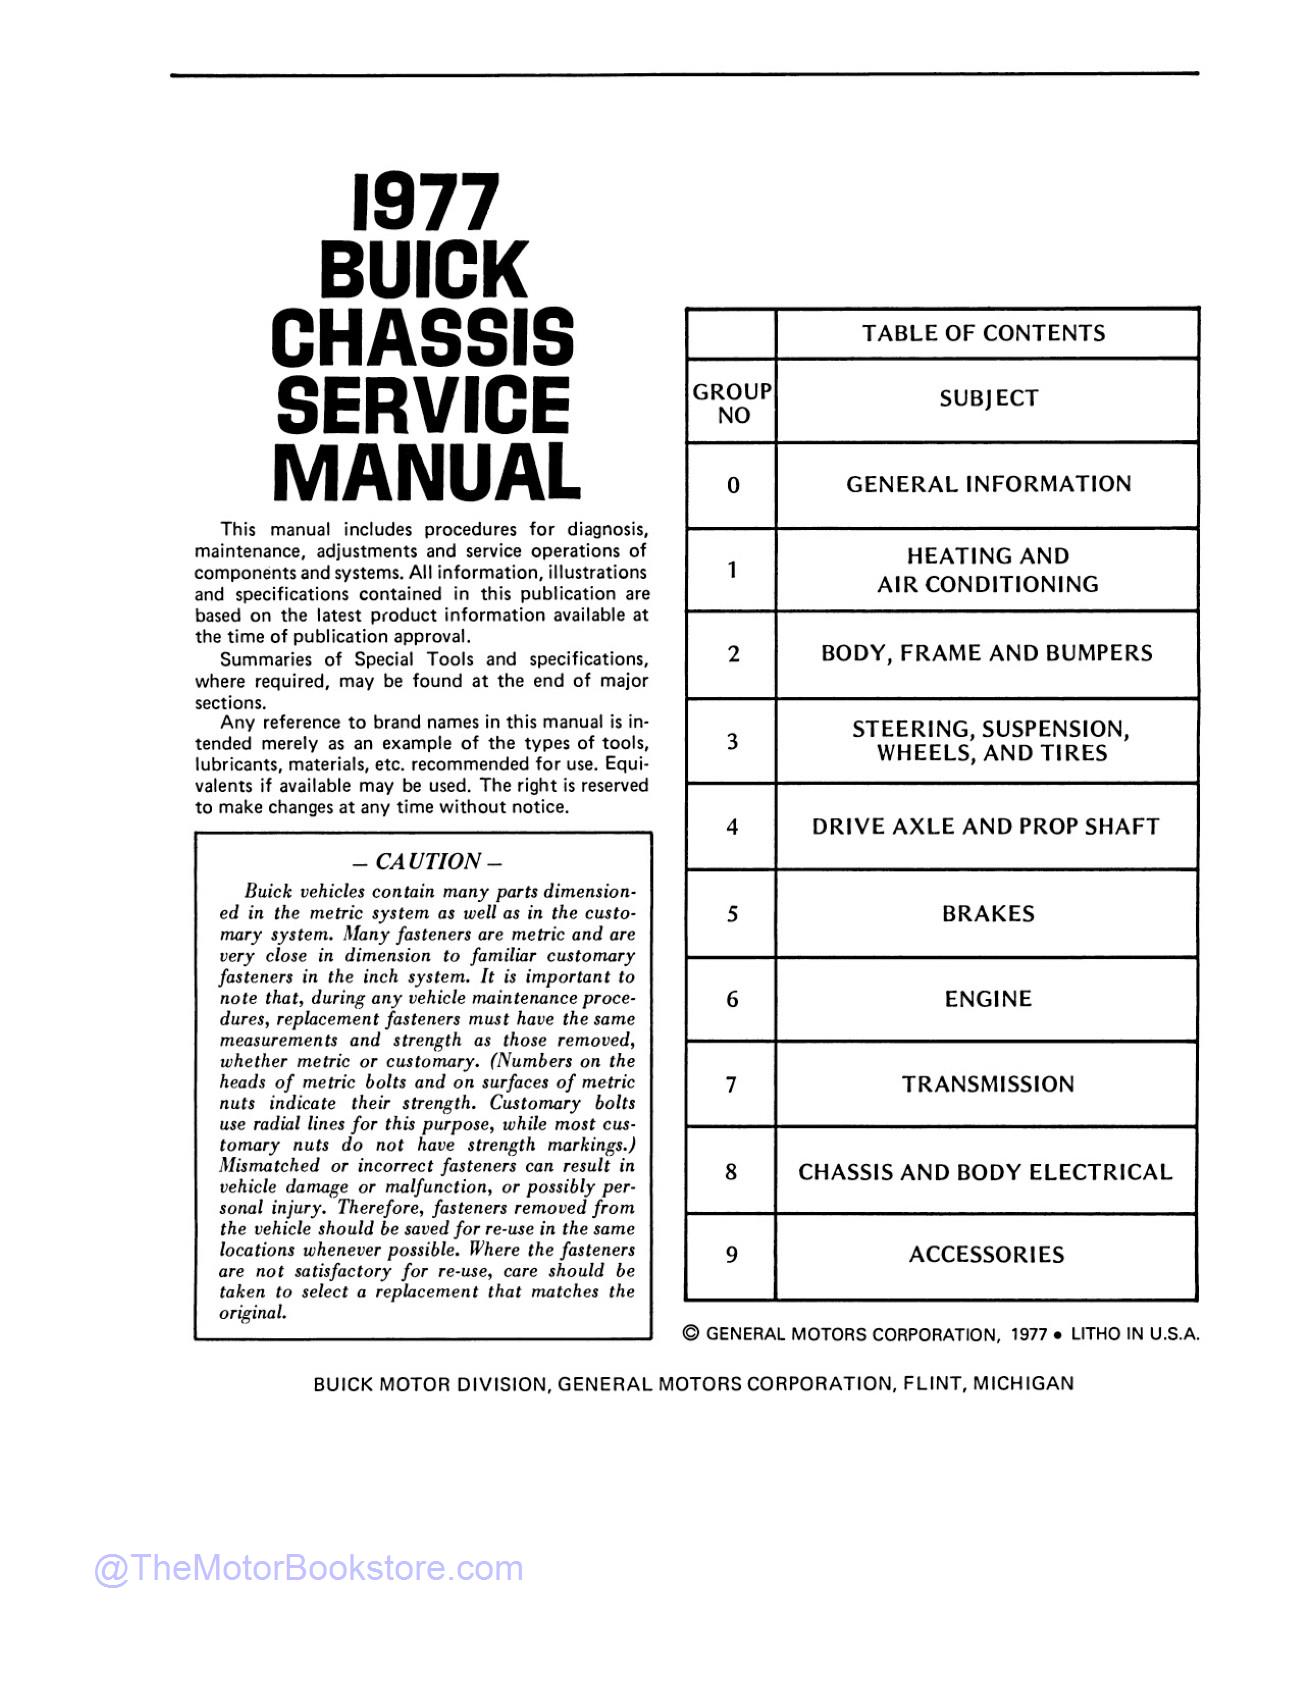 1977 Buick Chassis Service Manual All Series  - Table of Contents